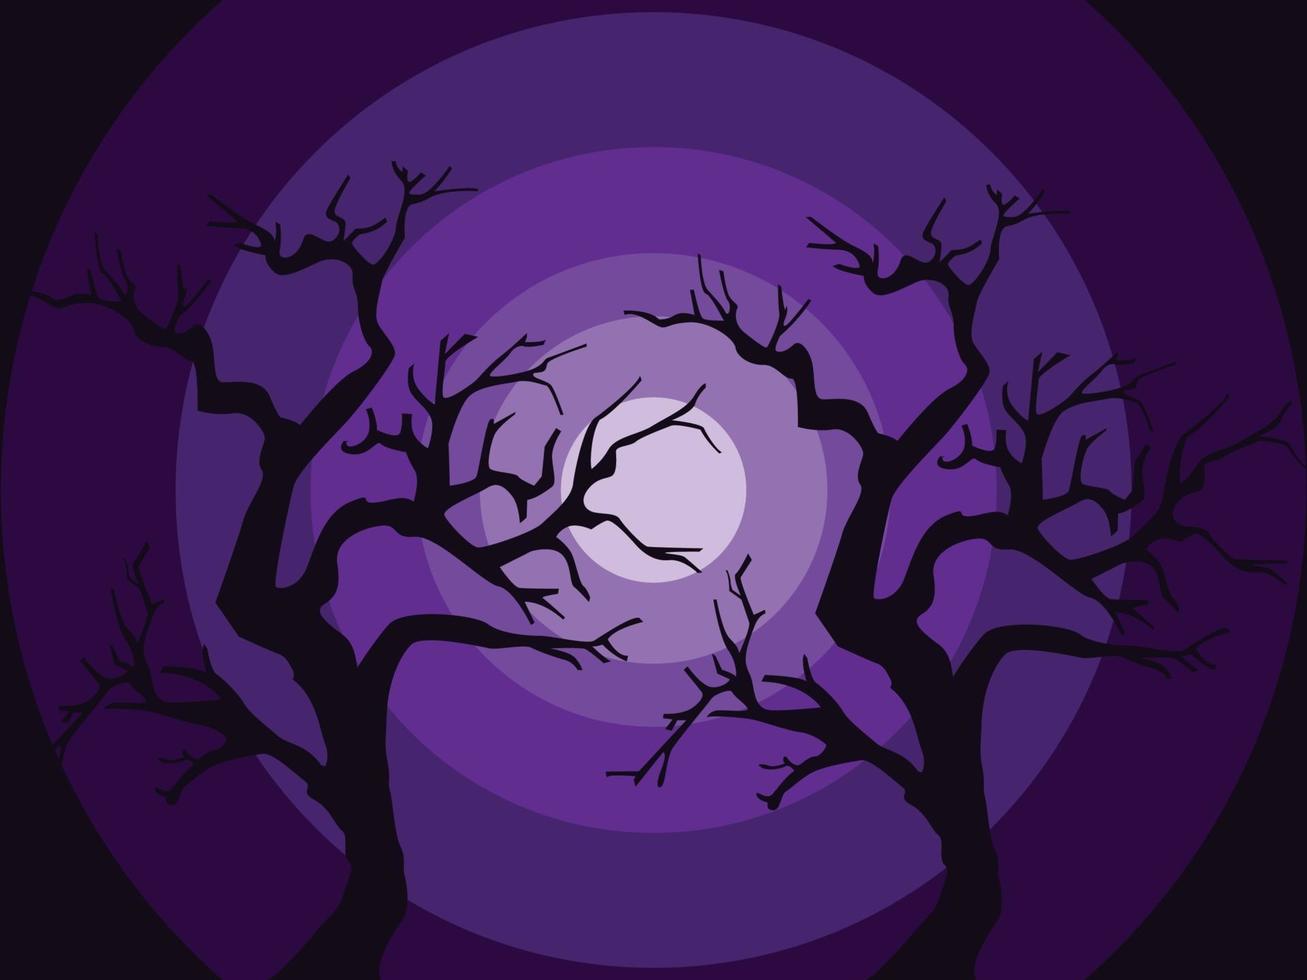 twigs tree background, halloween background with a tree, Halloween, scary tree in the night vector